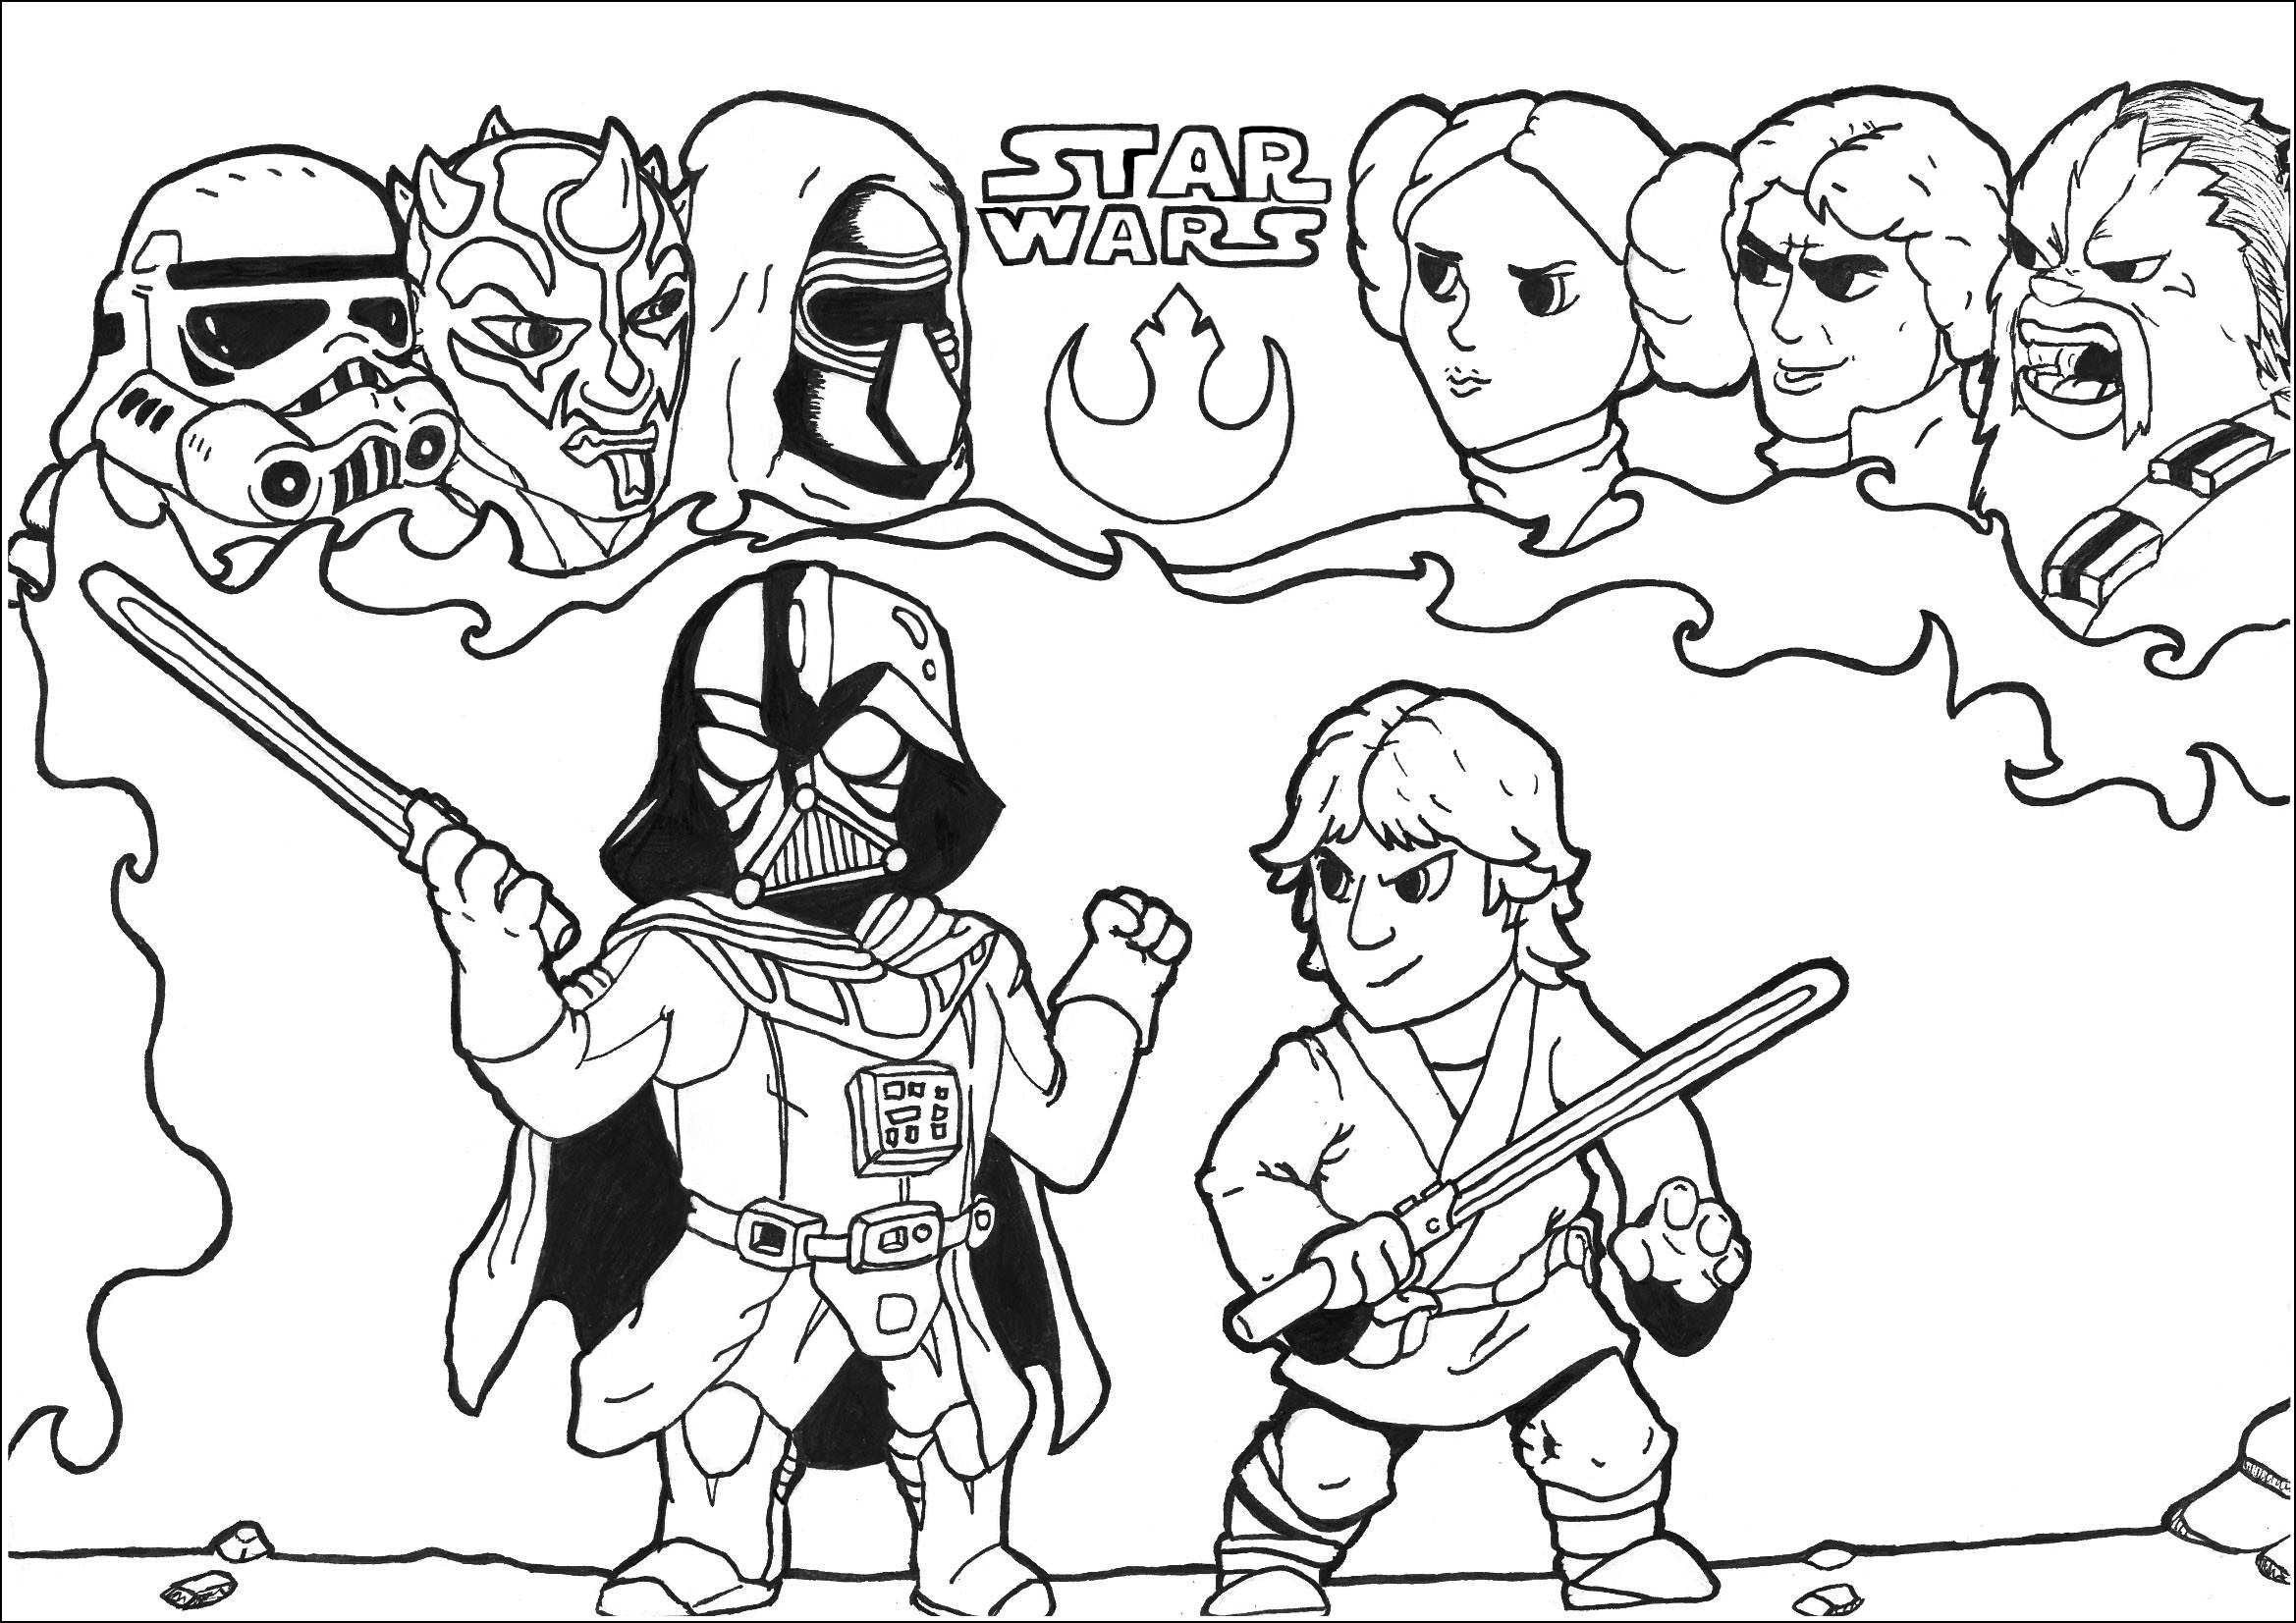 darth vader coloring pages printable new printable darth vader schön star wars darth vader ausmalbilder